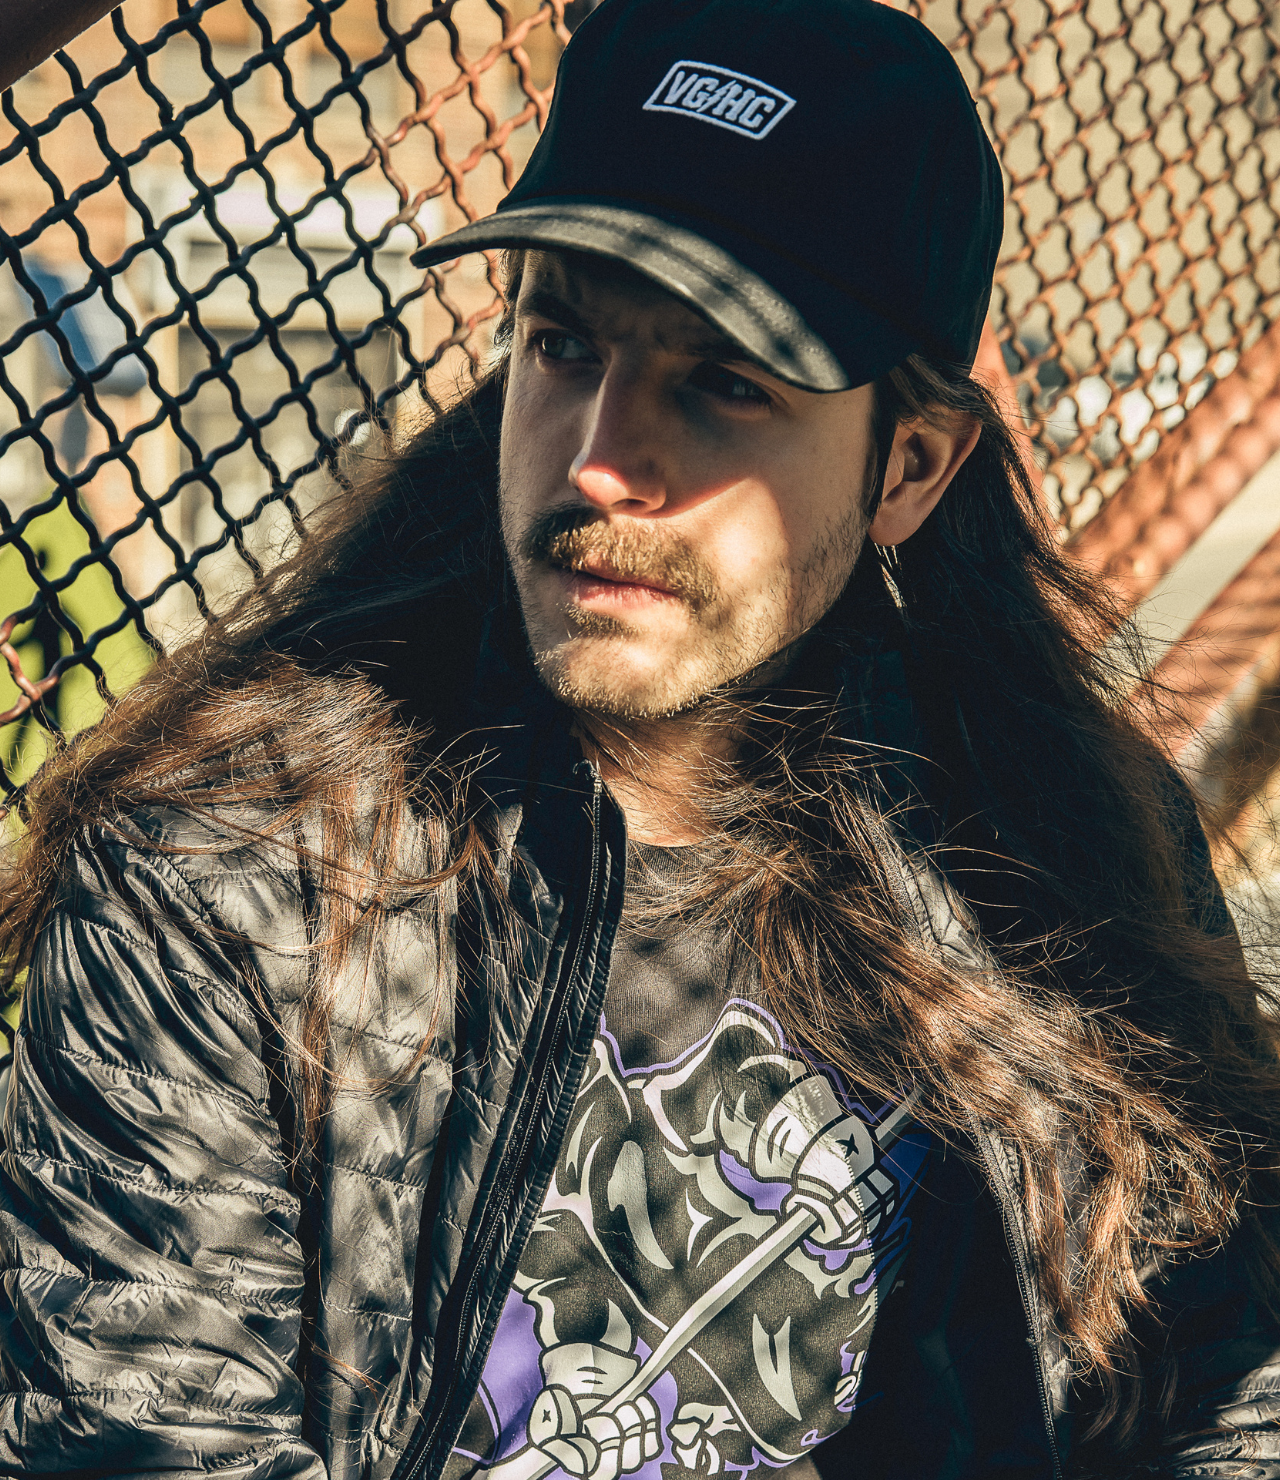 Orquest aedelweiss hockey clothing company new releases built by hockey fans for hockey fans in Sydney, CA. Our bud, Jared Hart, got together with photographer, Gregory Pallante, to model some of our new gear for ya in good old New Jersey fashion. 